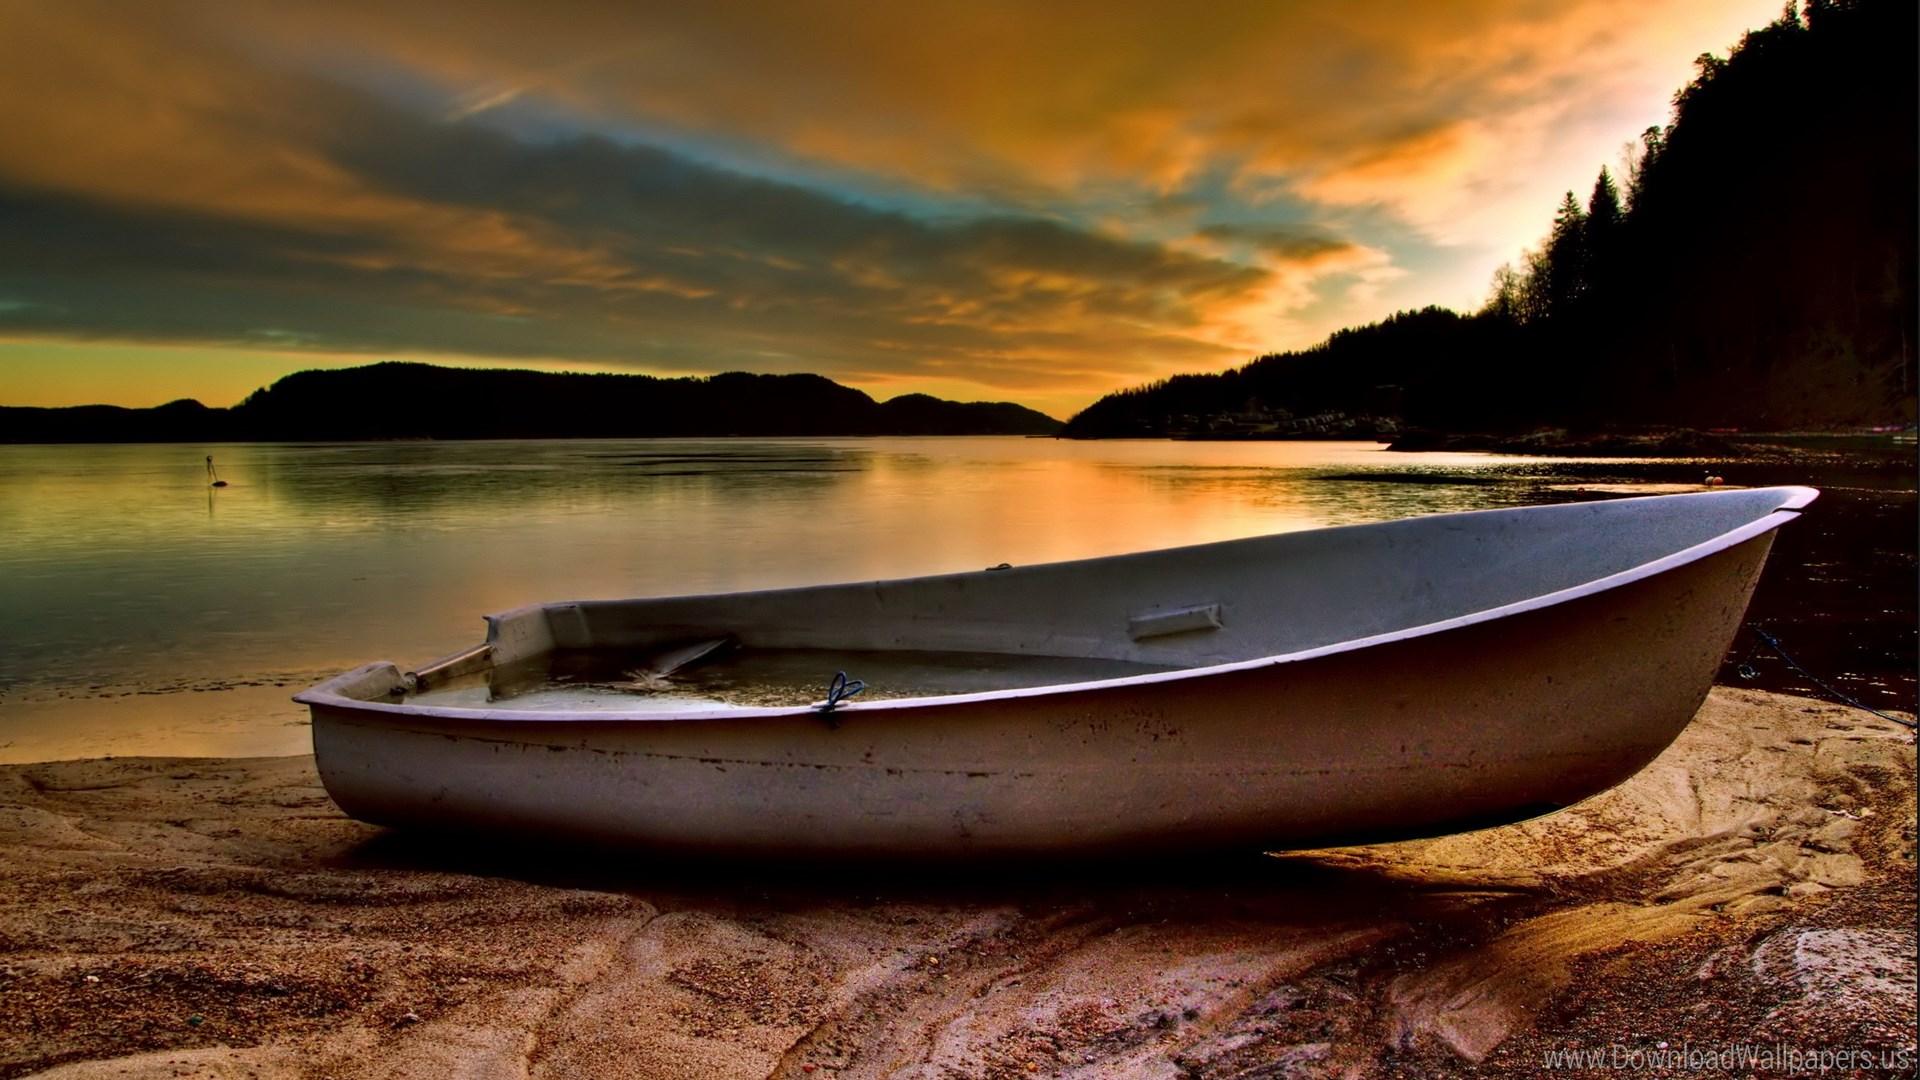 Download Widescreen 16:9 1920x1080 Boat, Boat At